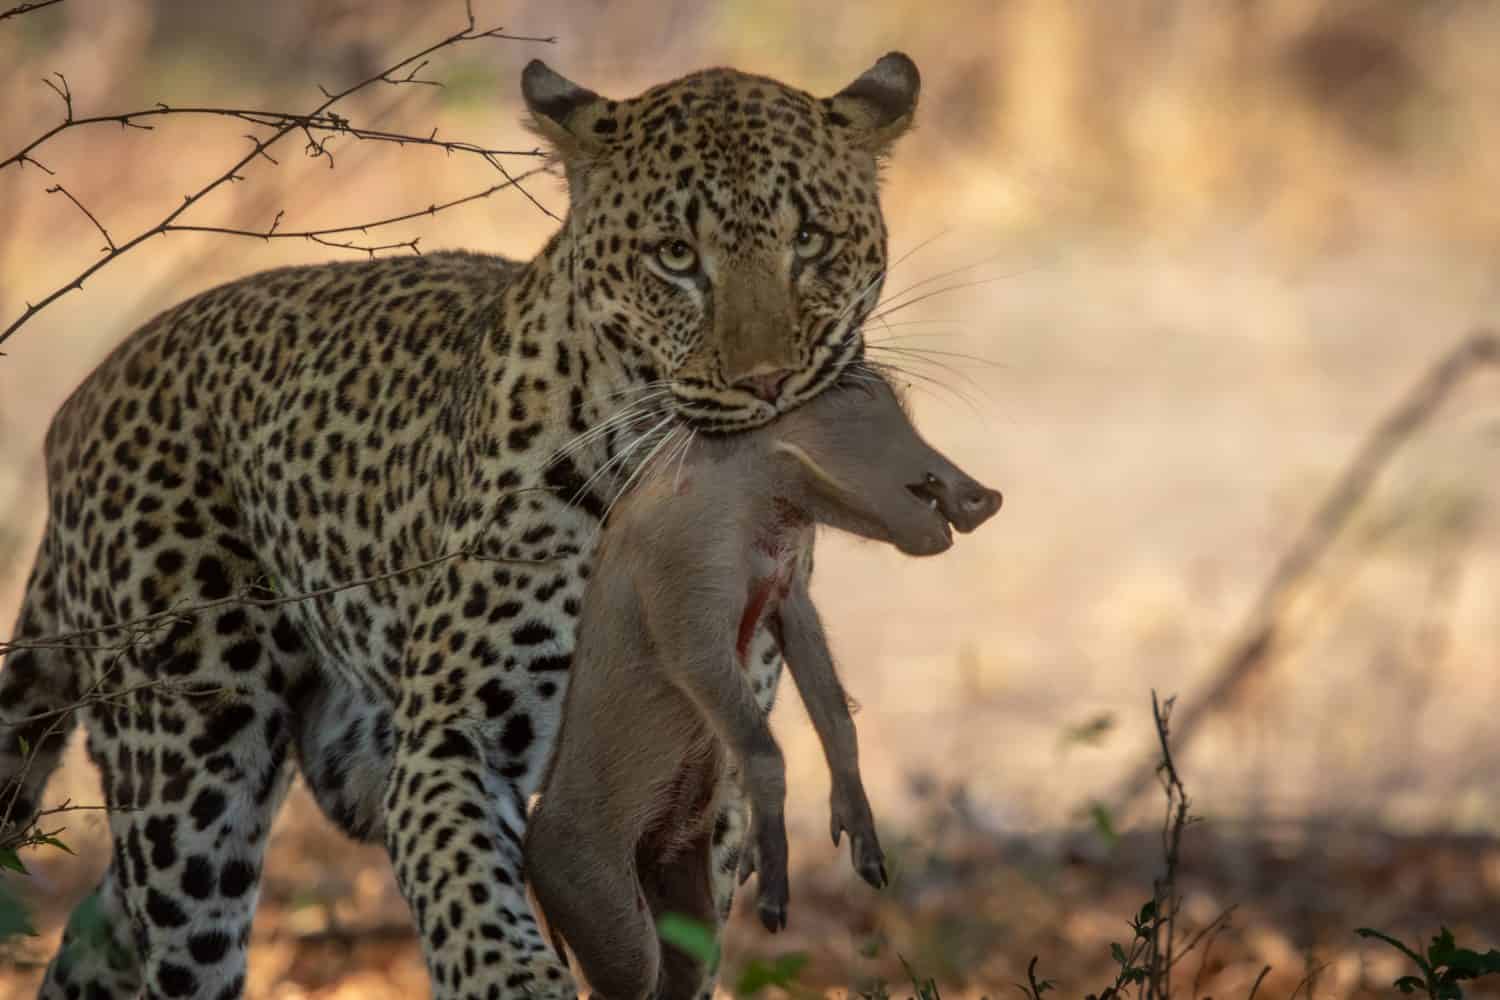 Leopard with warthog piglet in her mouth